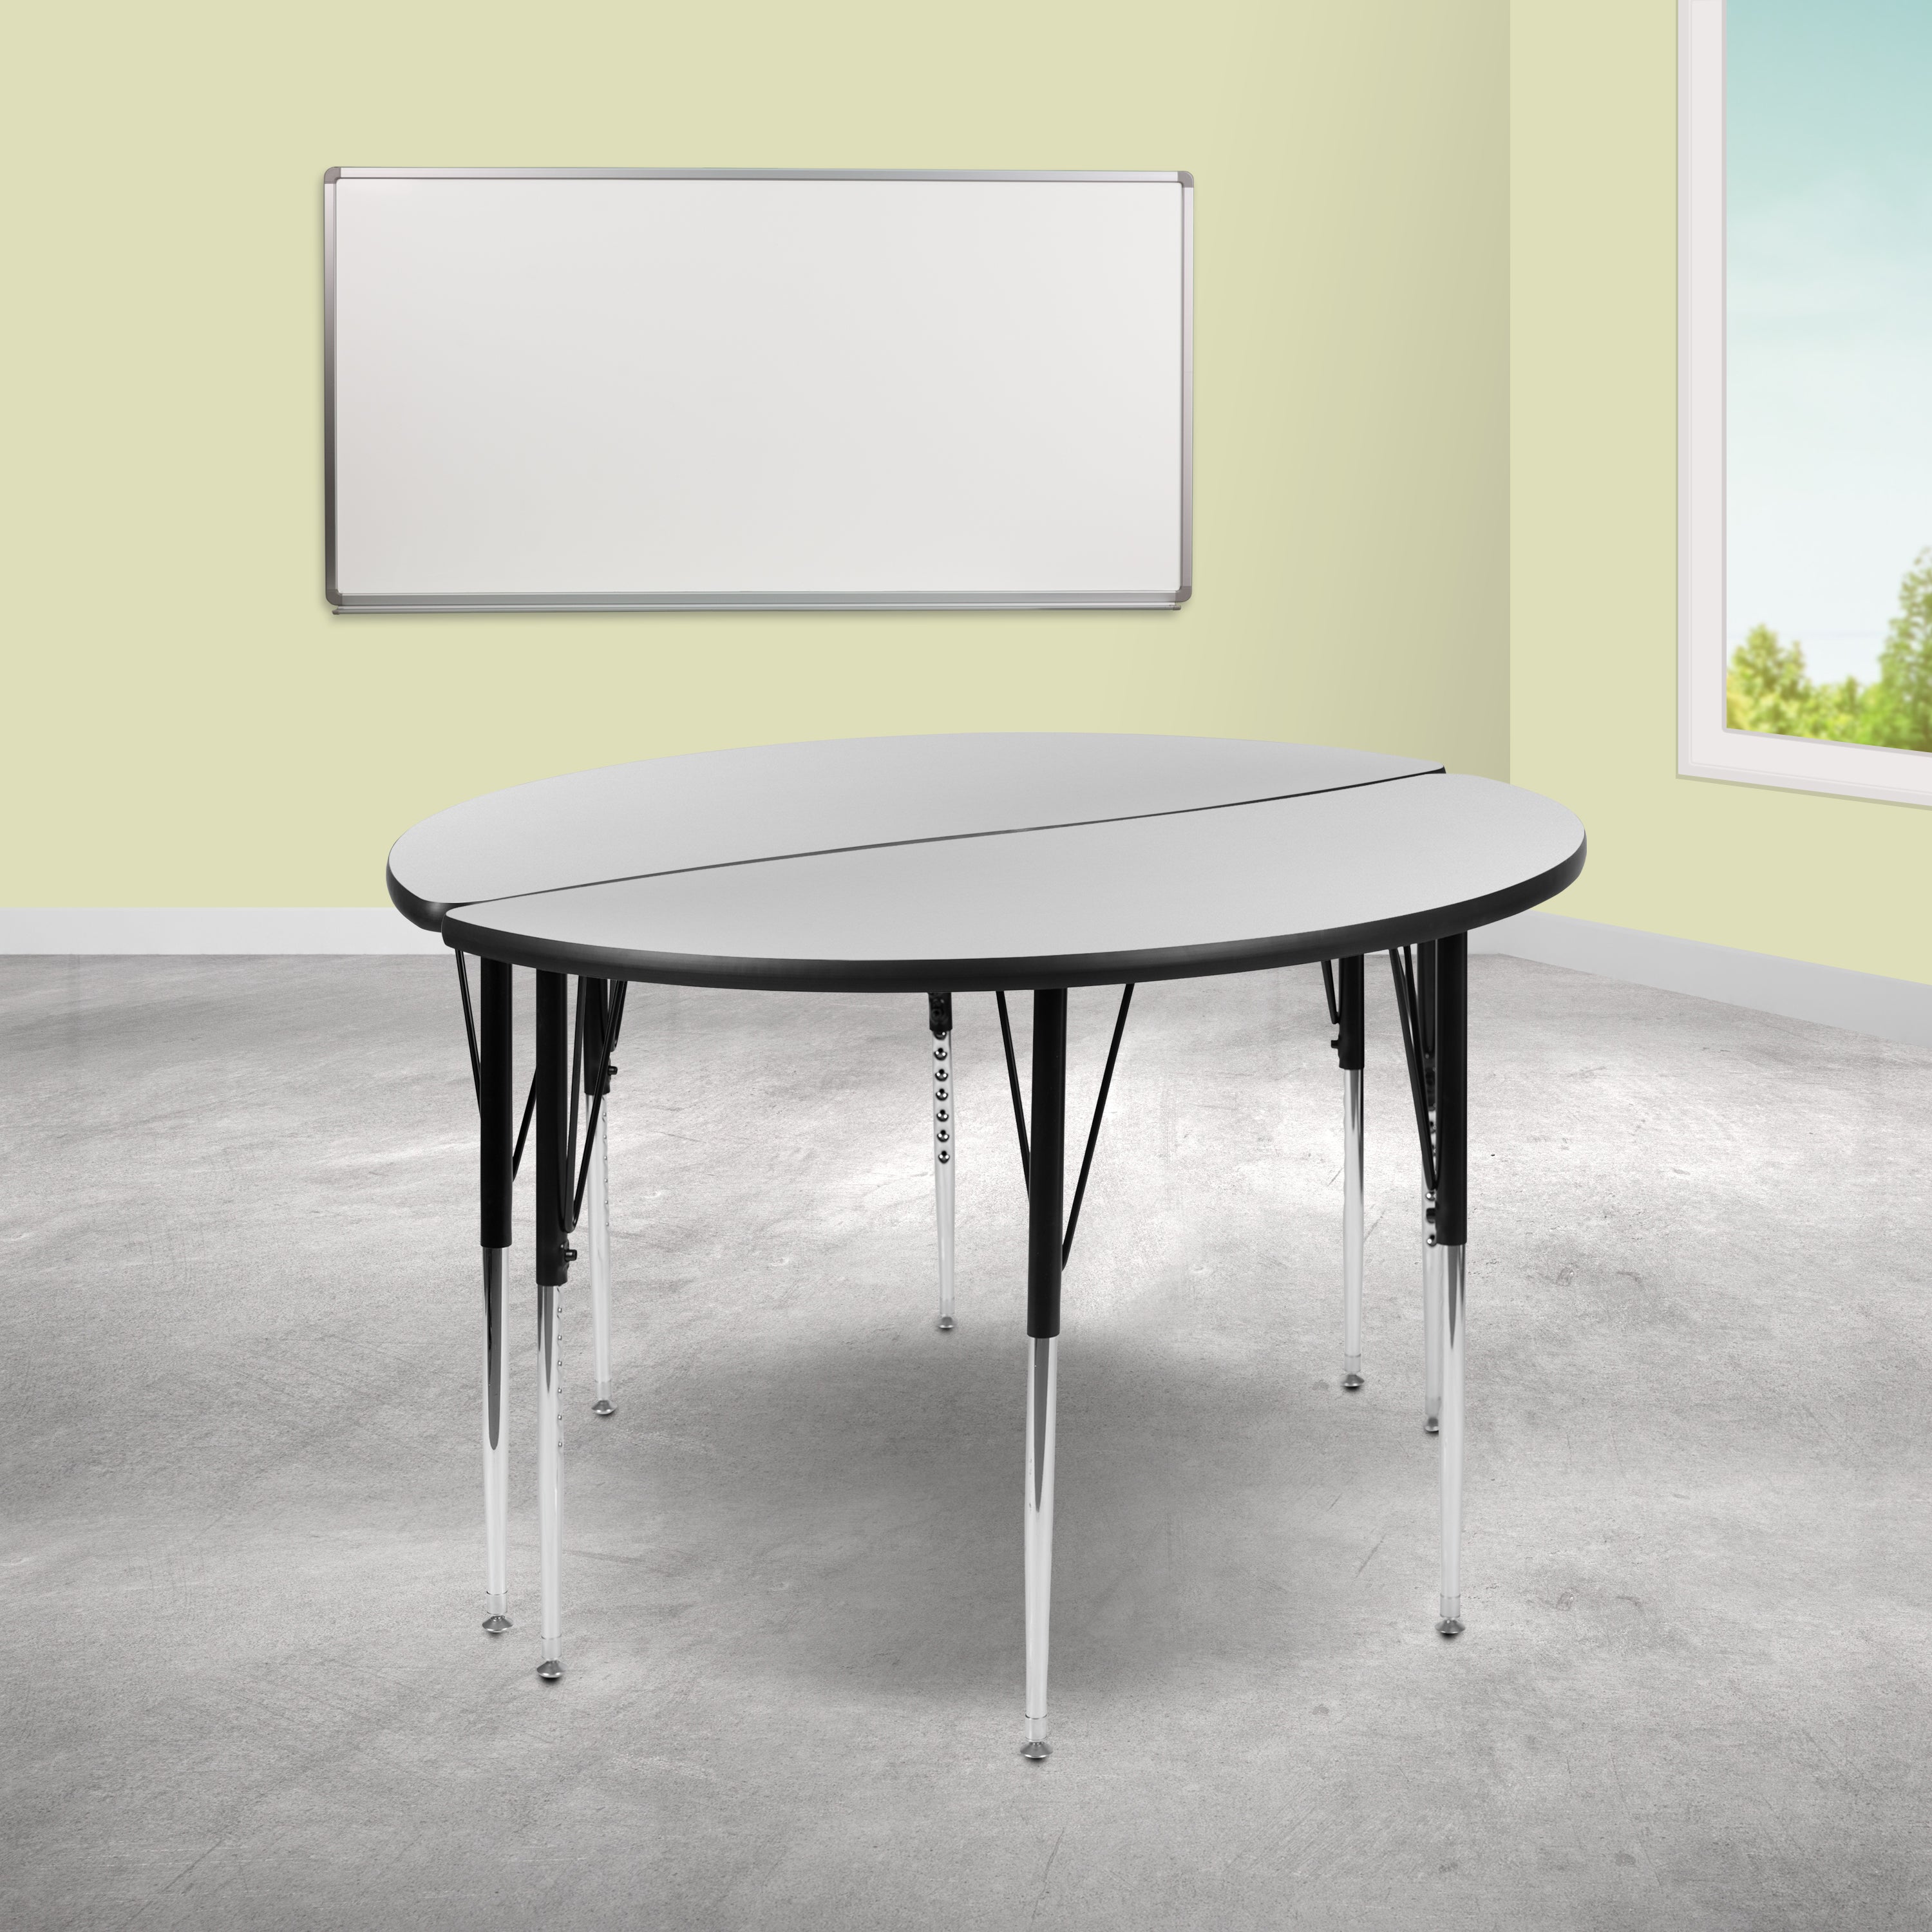 2 Piece 47.5" Circle Wave Flexible Grey Thermal Laminate Activity Table Set - Standard Height Adjustable Legs-Collaborative Activity Table Set-Flash Furniture-Wall2Wall Furnishings